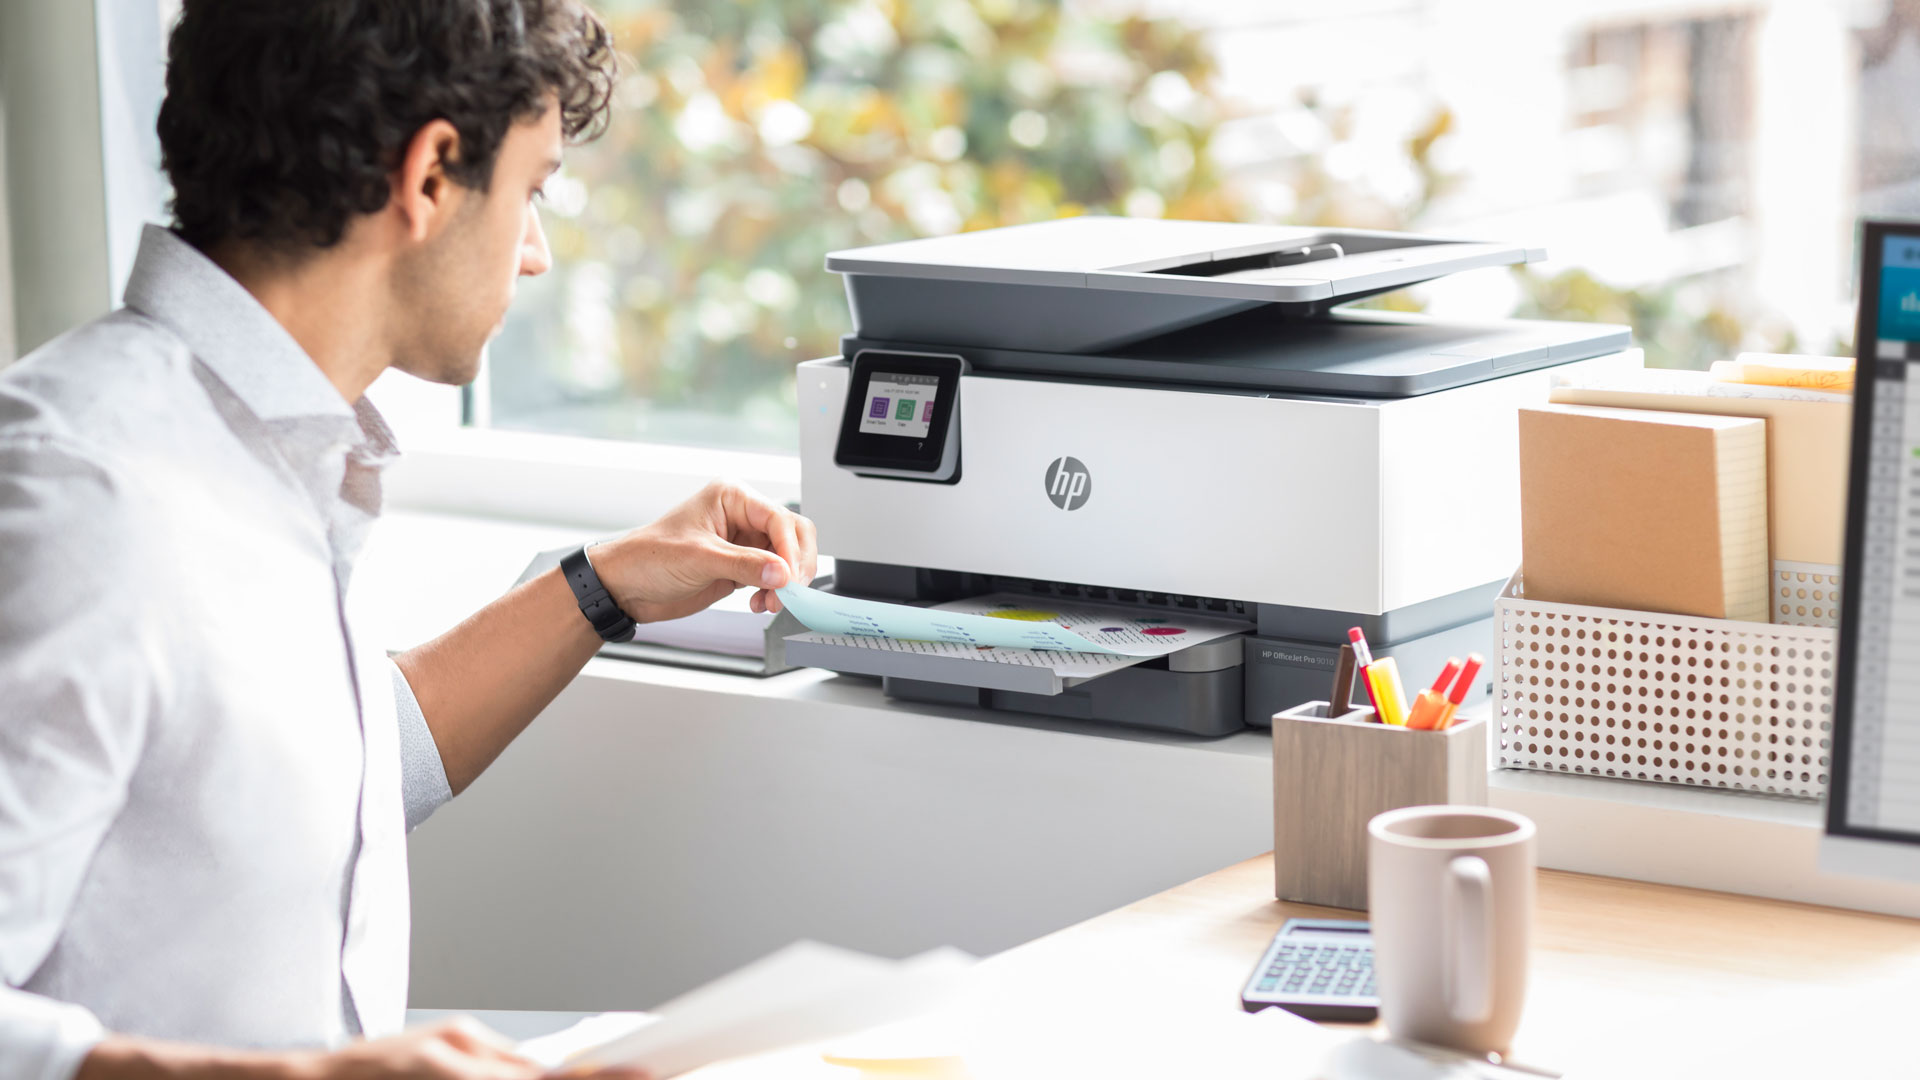 I’ve avoided buying a printer for years, but even I’ll be tempted on Black Friday